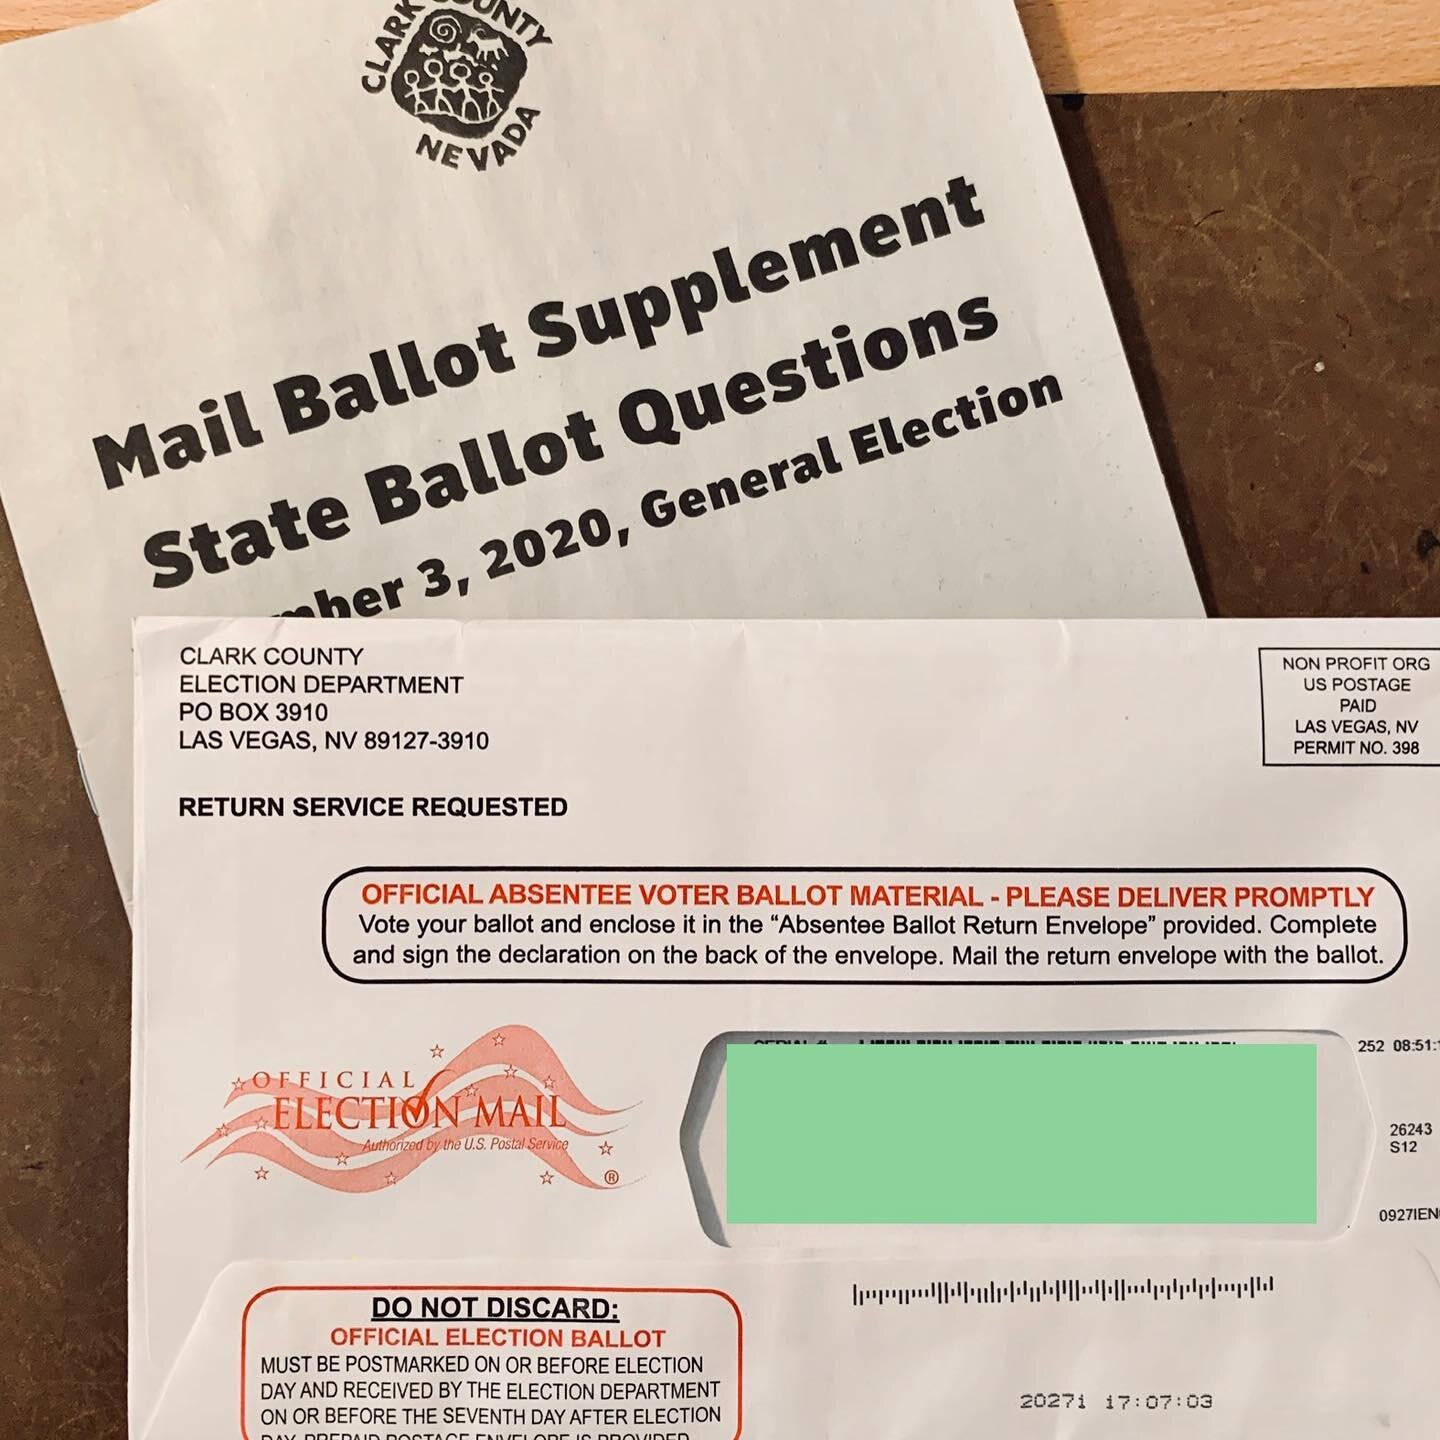 Pictured here is the most powerful tool in the world - the Ballot. I received &gt;1.5 lbs. of campaign mail- crammed into my mailbox where I suffered a wicked paper cut (pictured here). In casting my ballot I choose to participate in government. I al